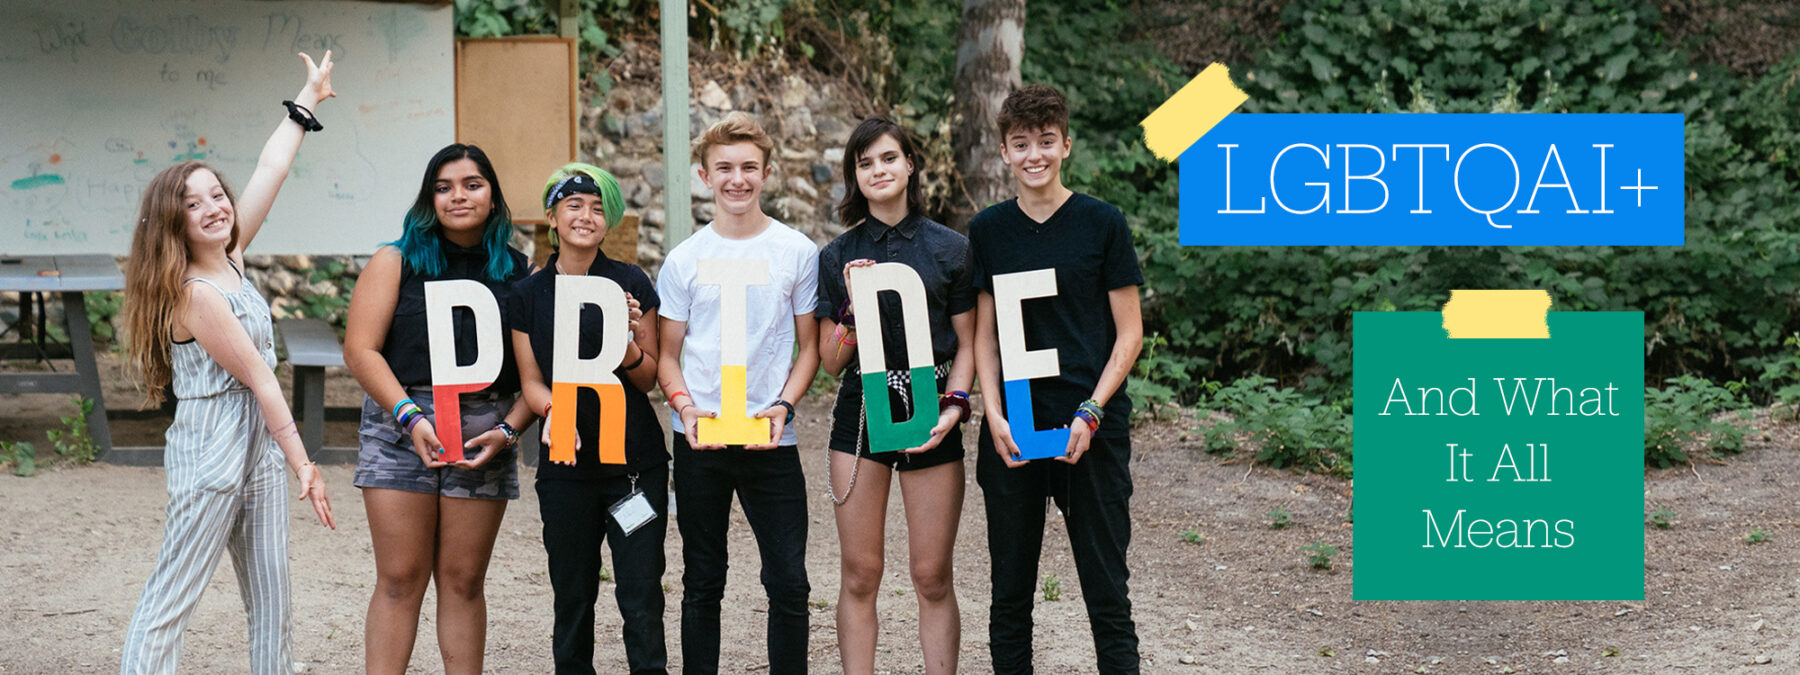 photo of LGBT youth holding 